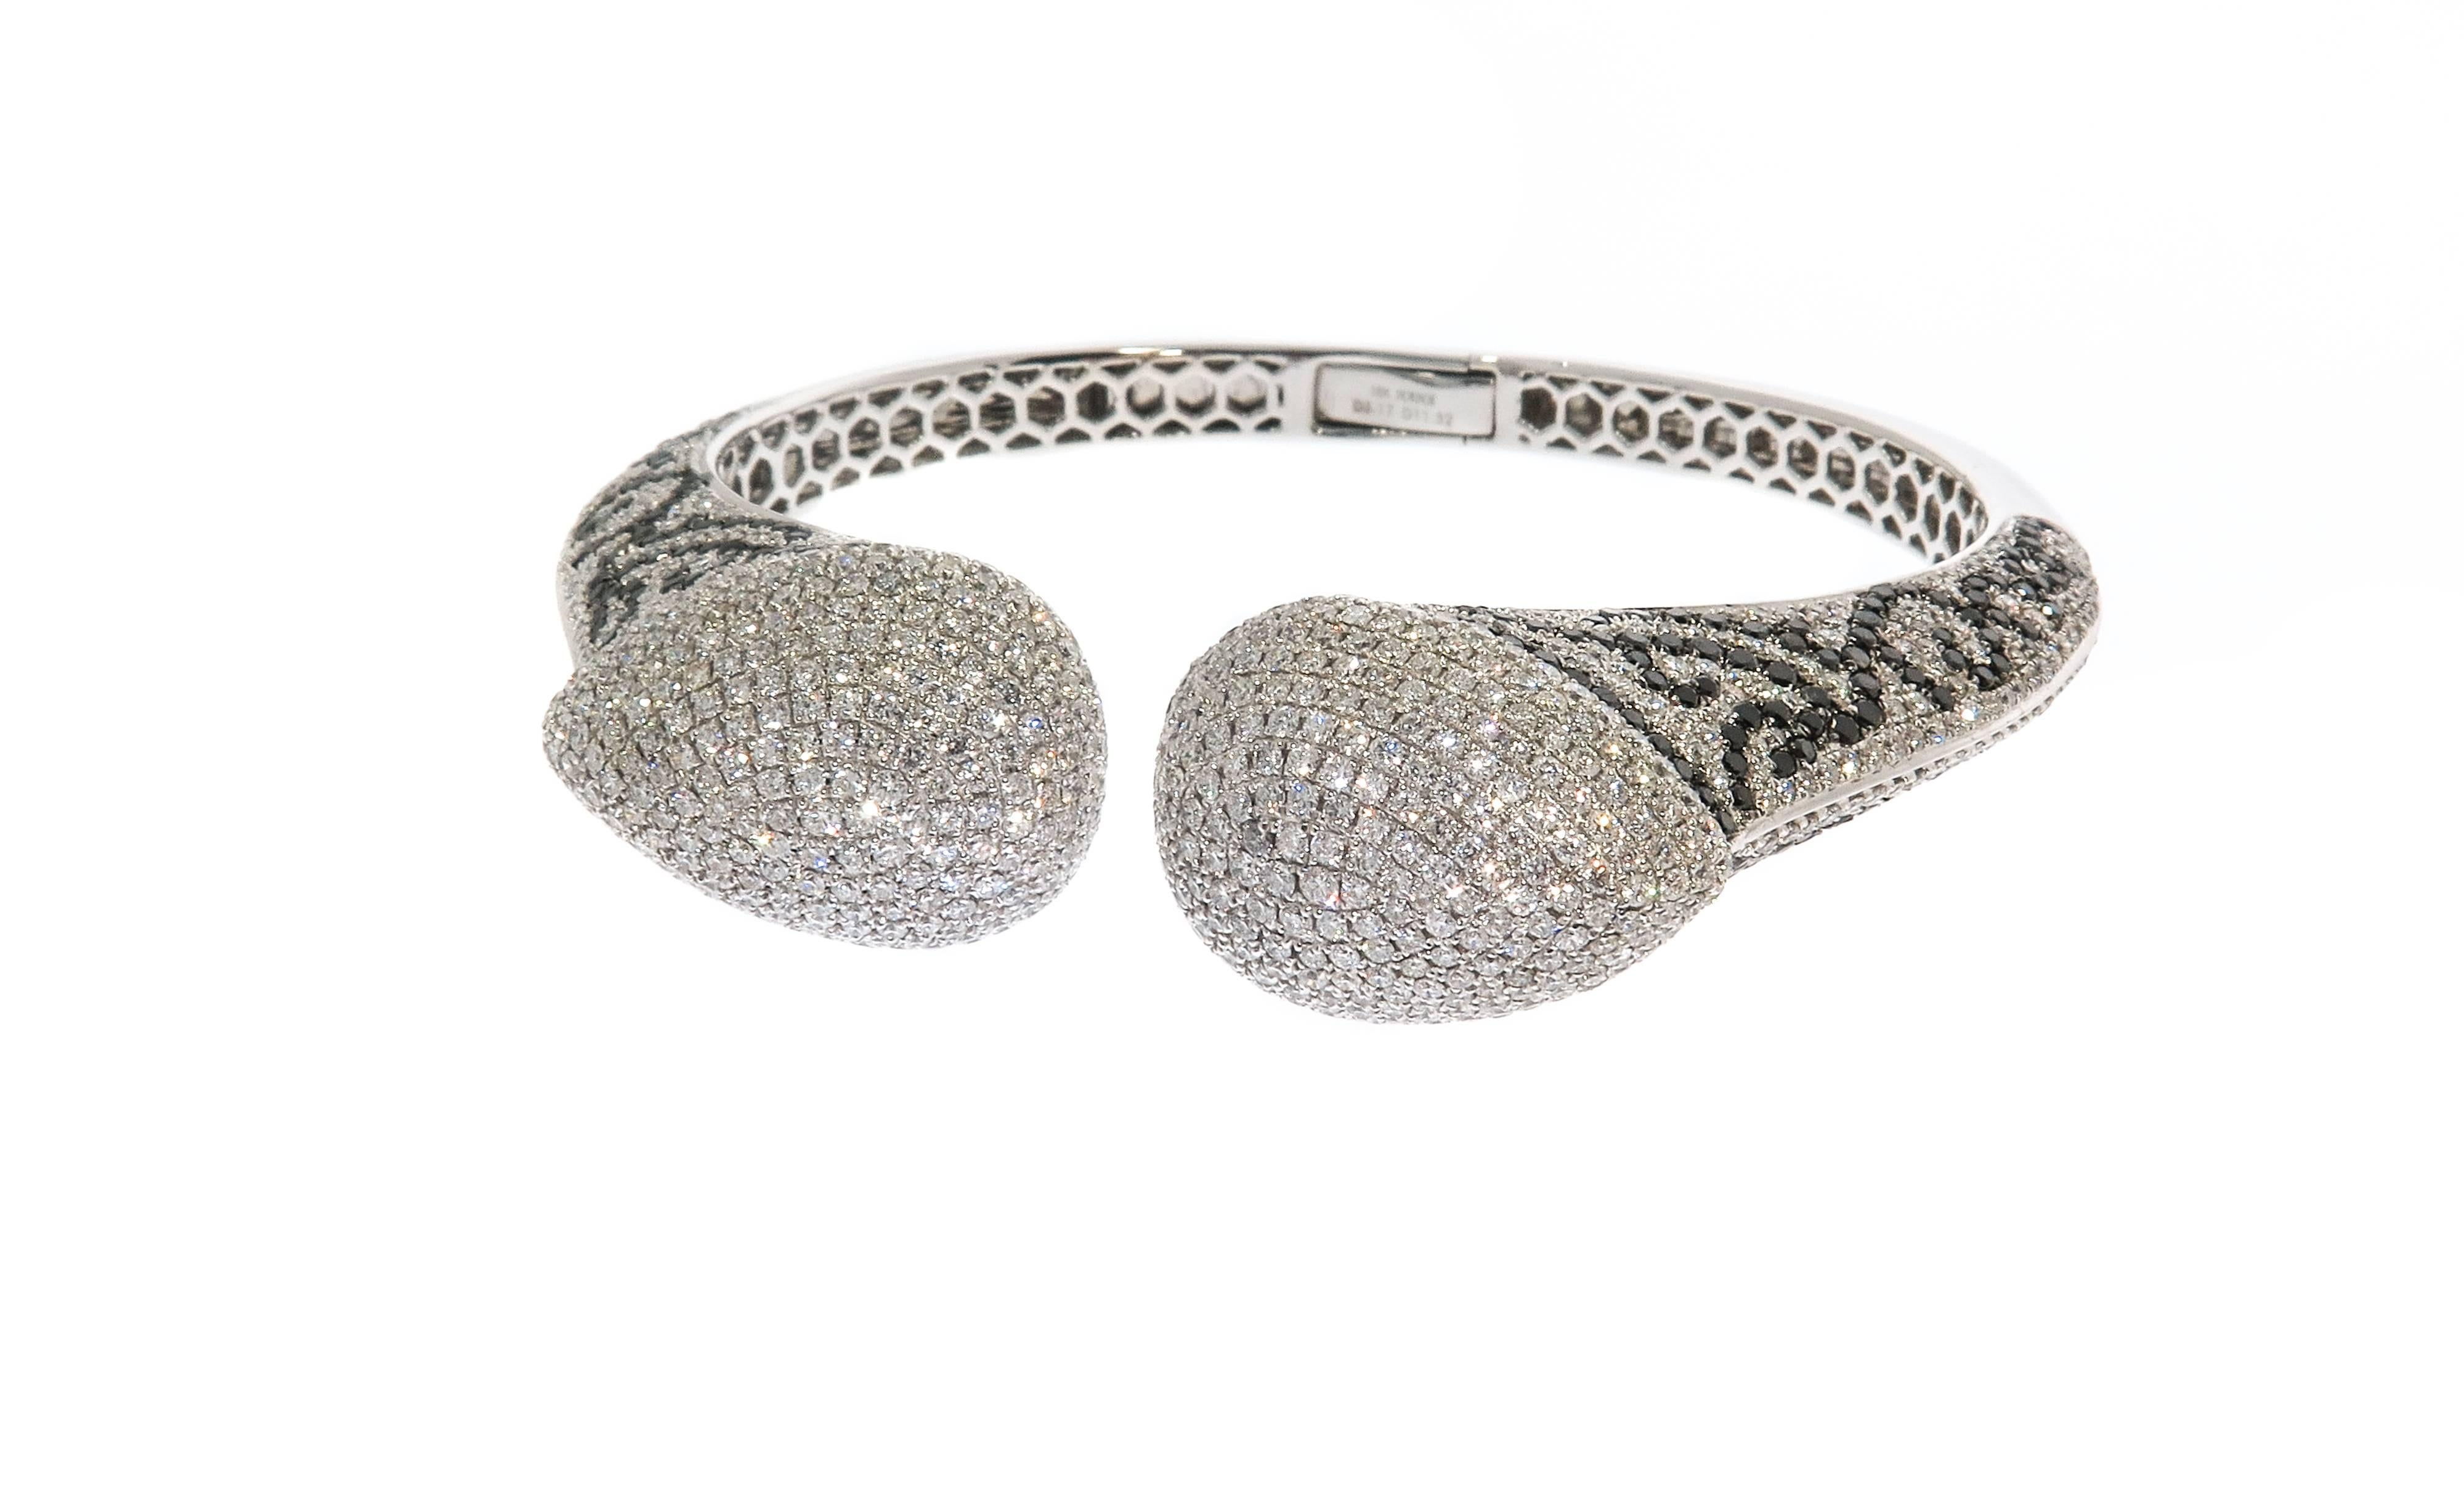 An amazing craftsmanship featured in this Diamond Cuff Bracelet, stunningly decorated with 1080 white round diamonds (11.32 carats) and swirls of 370 Black Diamonds (3.17 carats).
Handcrafted by our expert goldsmiths in 18k white gold, weighing